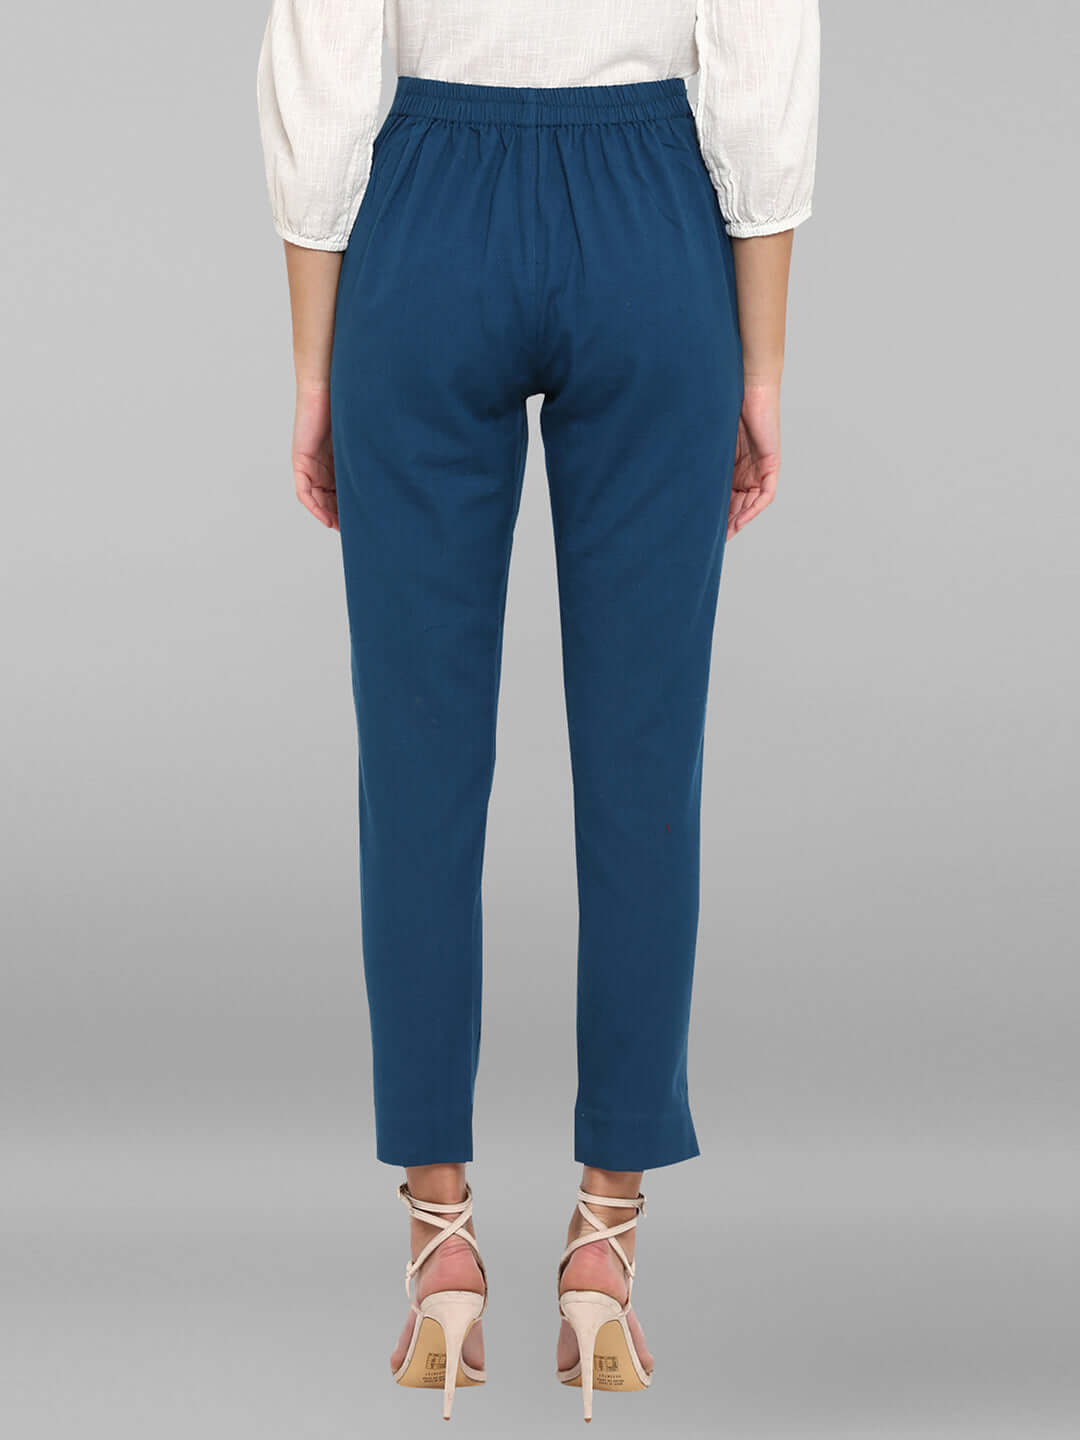 Teal Cotton Solid Casual Pant